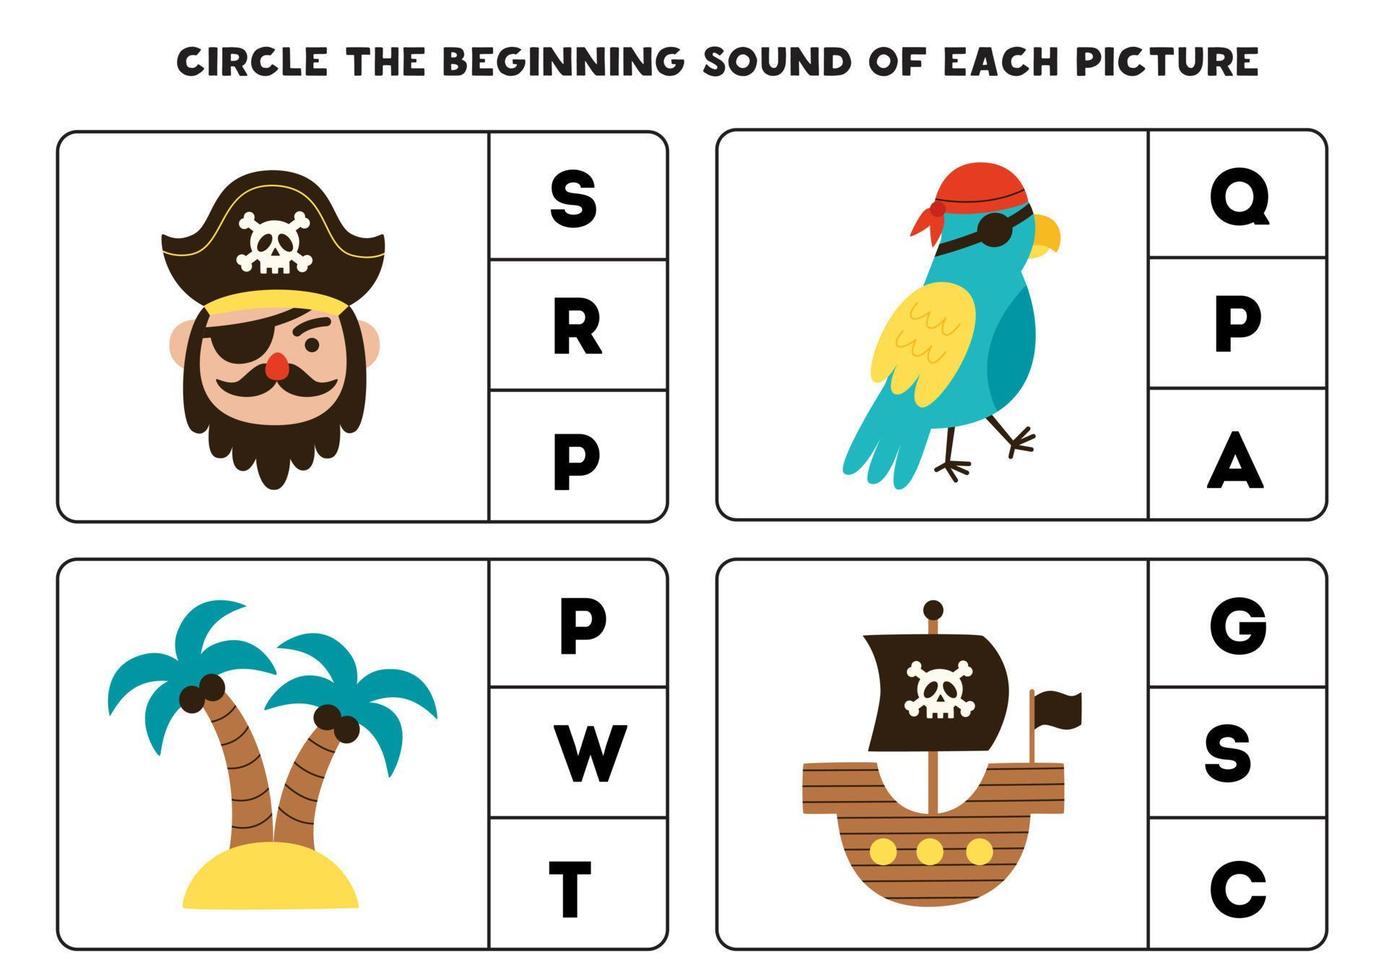 Worksheet for kids. Find the beginning sound of pirate elements. vector